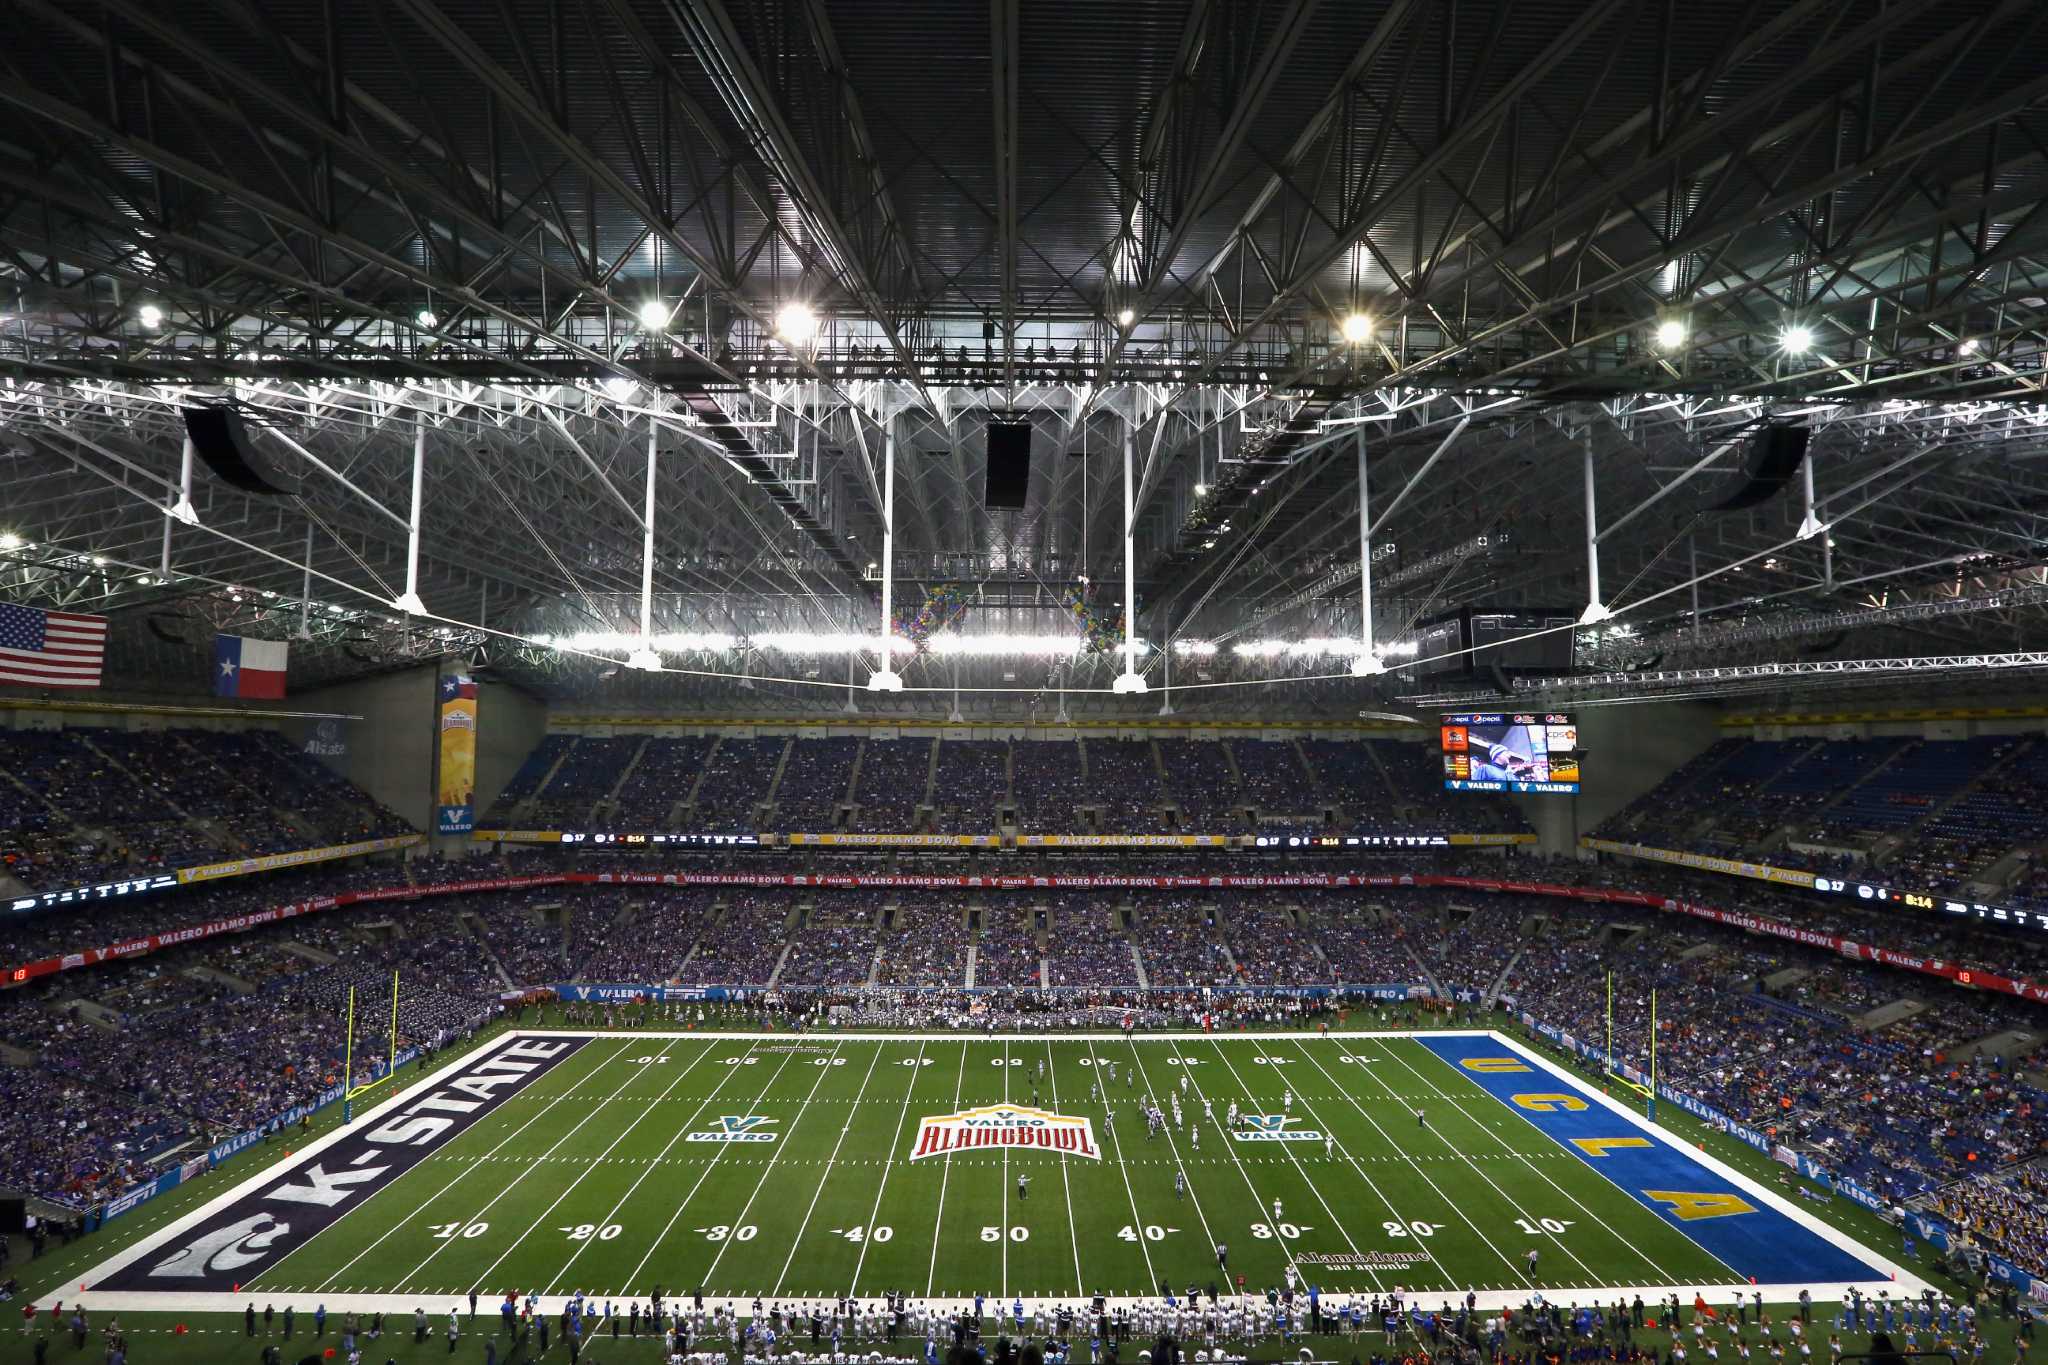 Alamodome - Facts, figures, pictures and more of the Alamo Bowl Game stadium